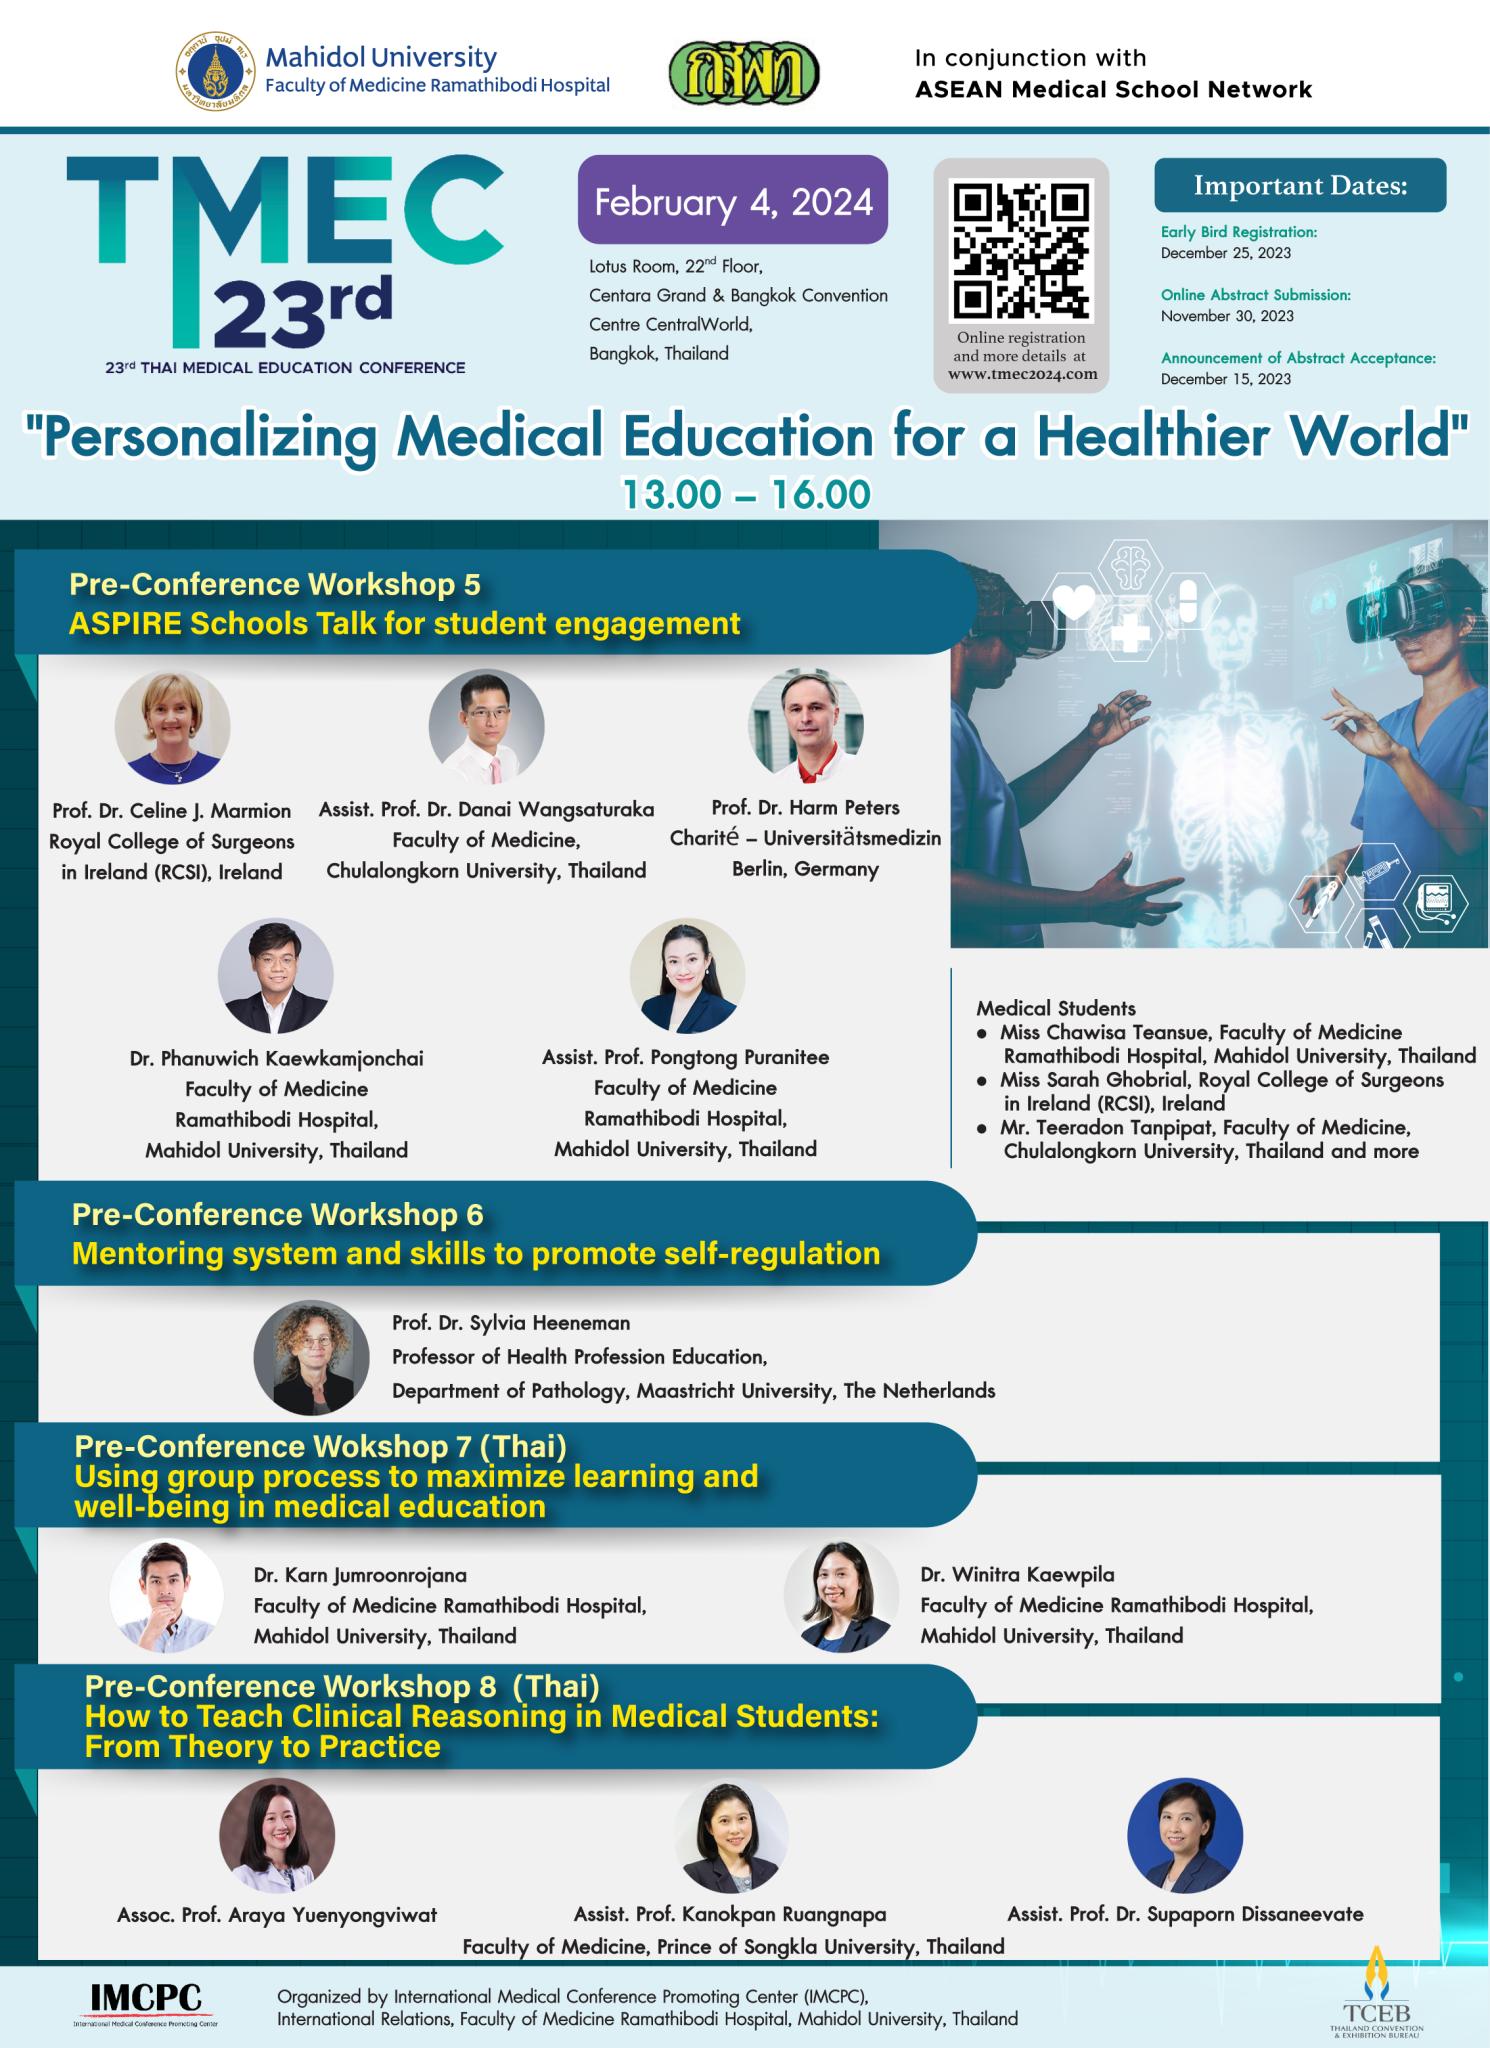 23rd TMEC "Personalizing Medical Education for a Healthier World"